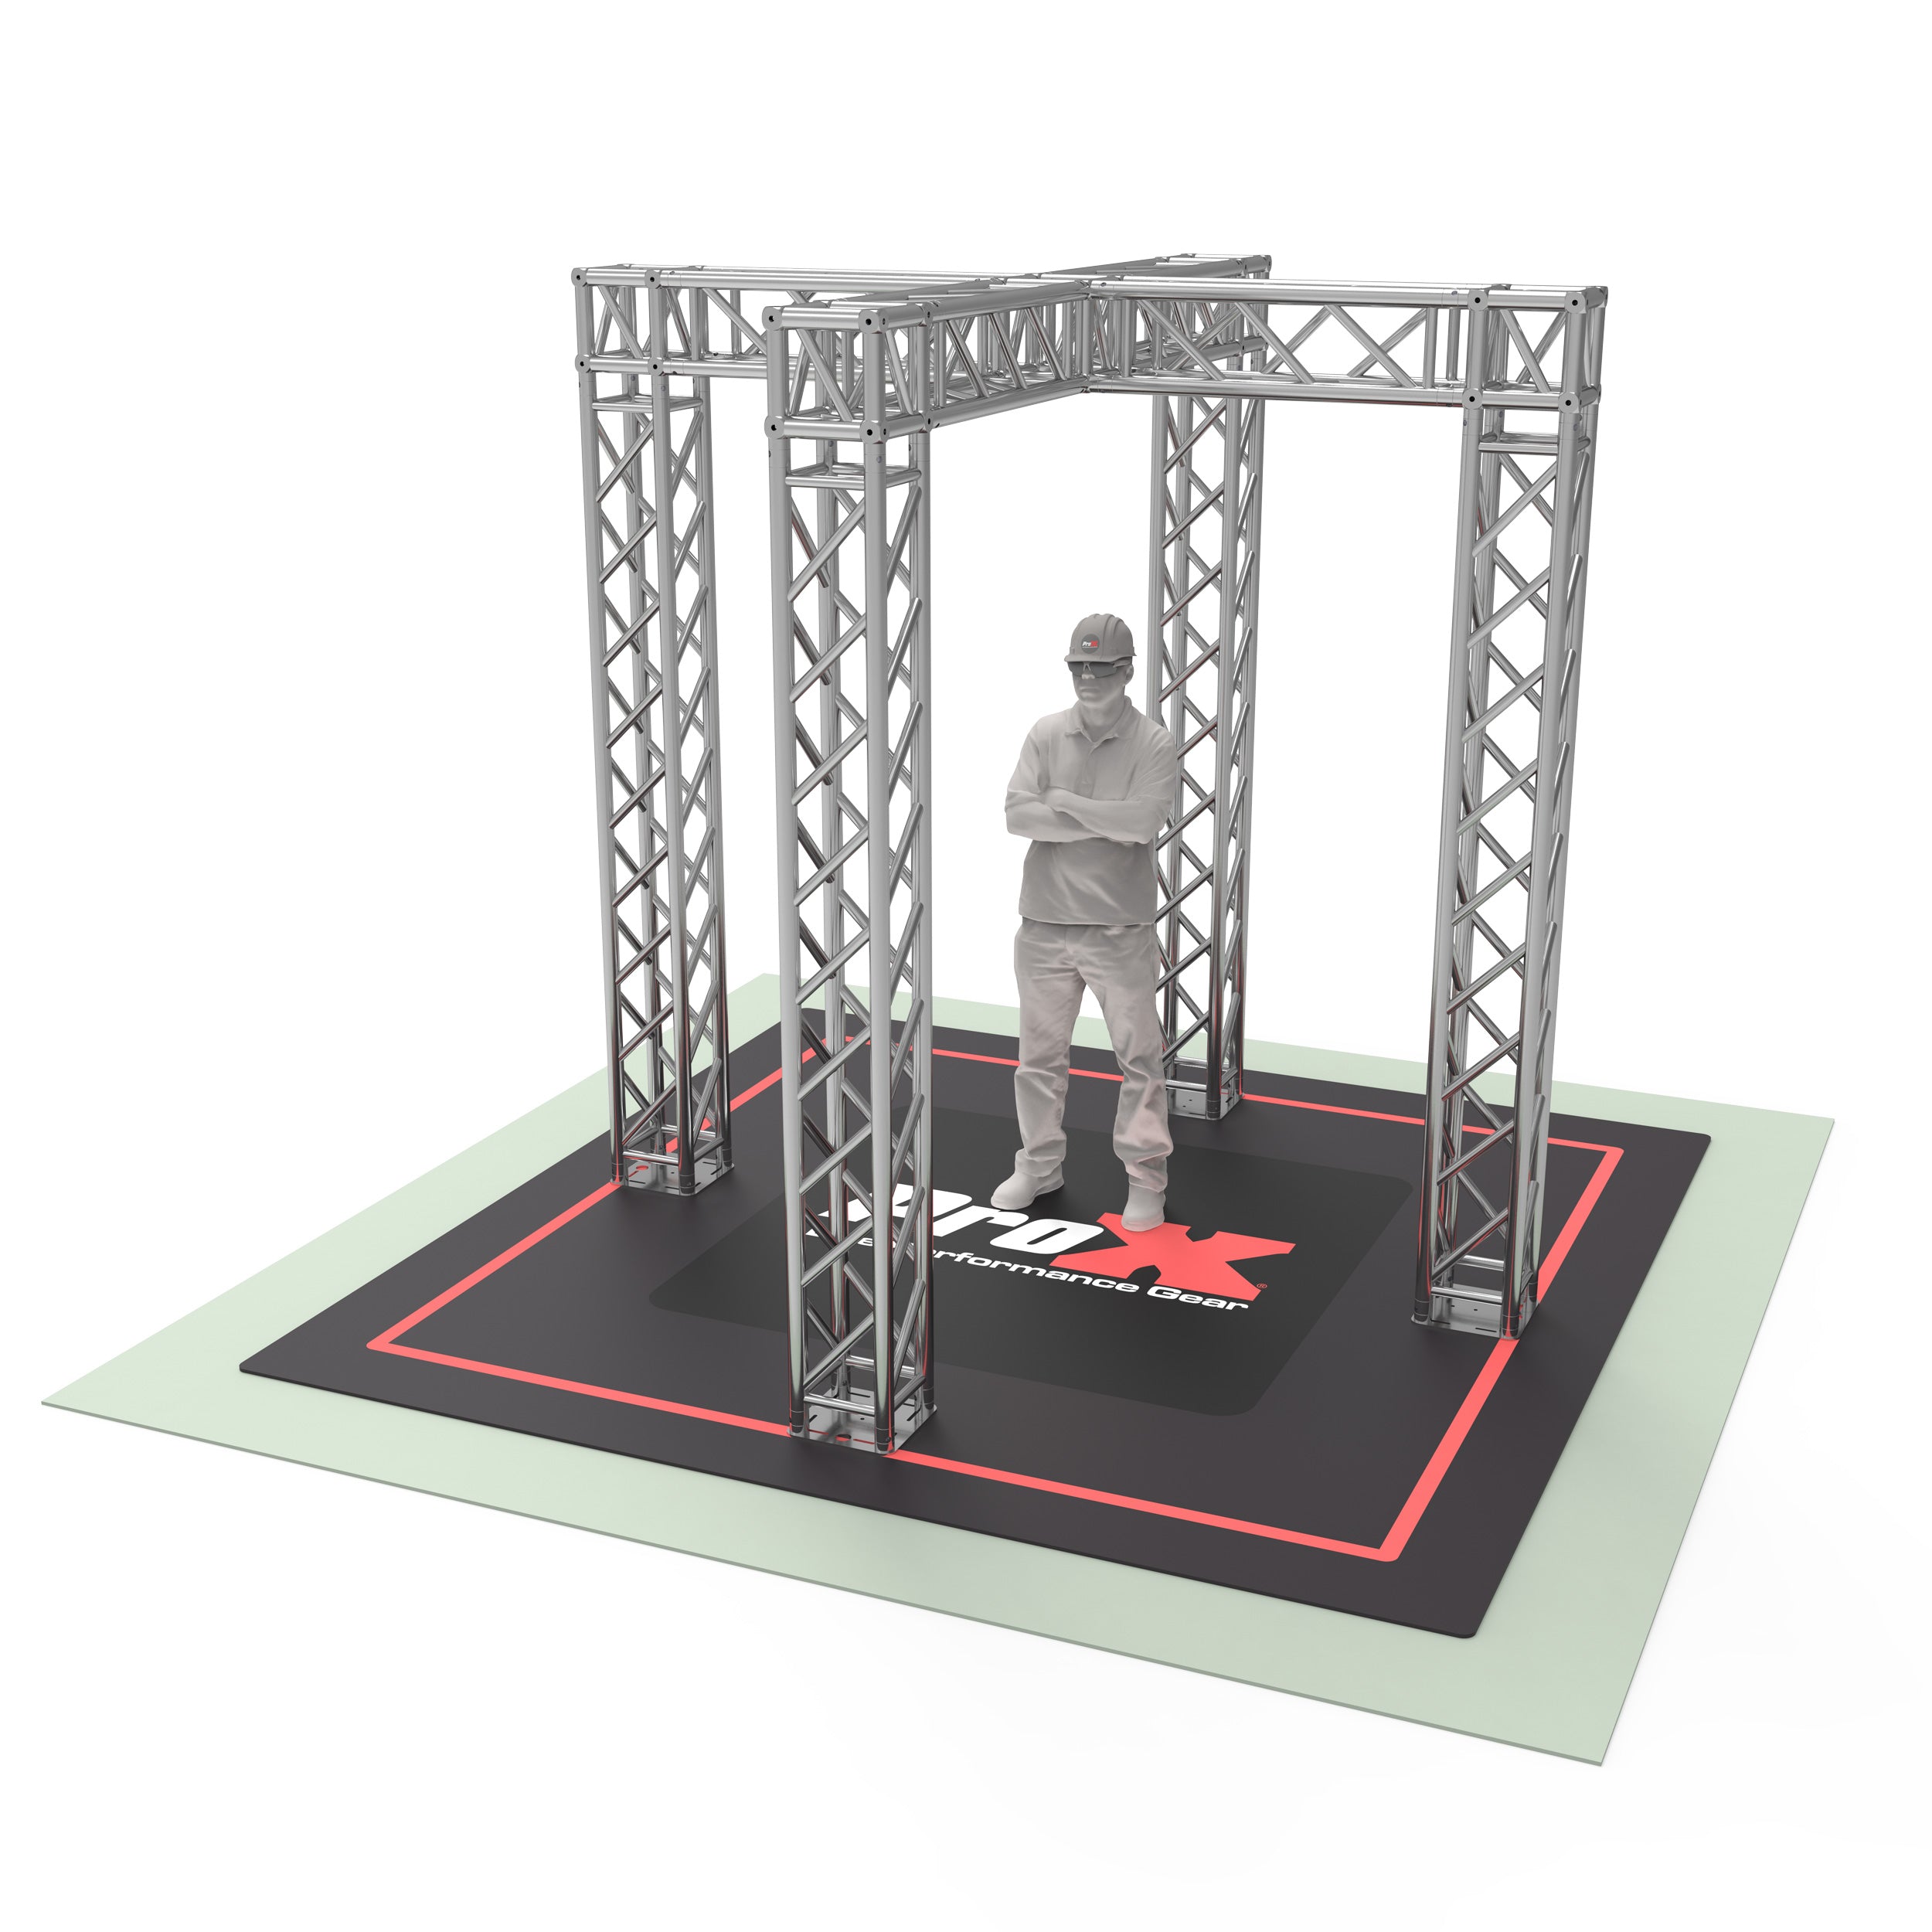 Pro X Tradeshow Booth 9.42 W X 9.42 L X 9.20 FT H with X Shape Design in center - 2mm Heavy Duty Truss XTP-999X